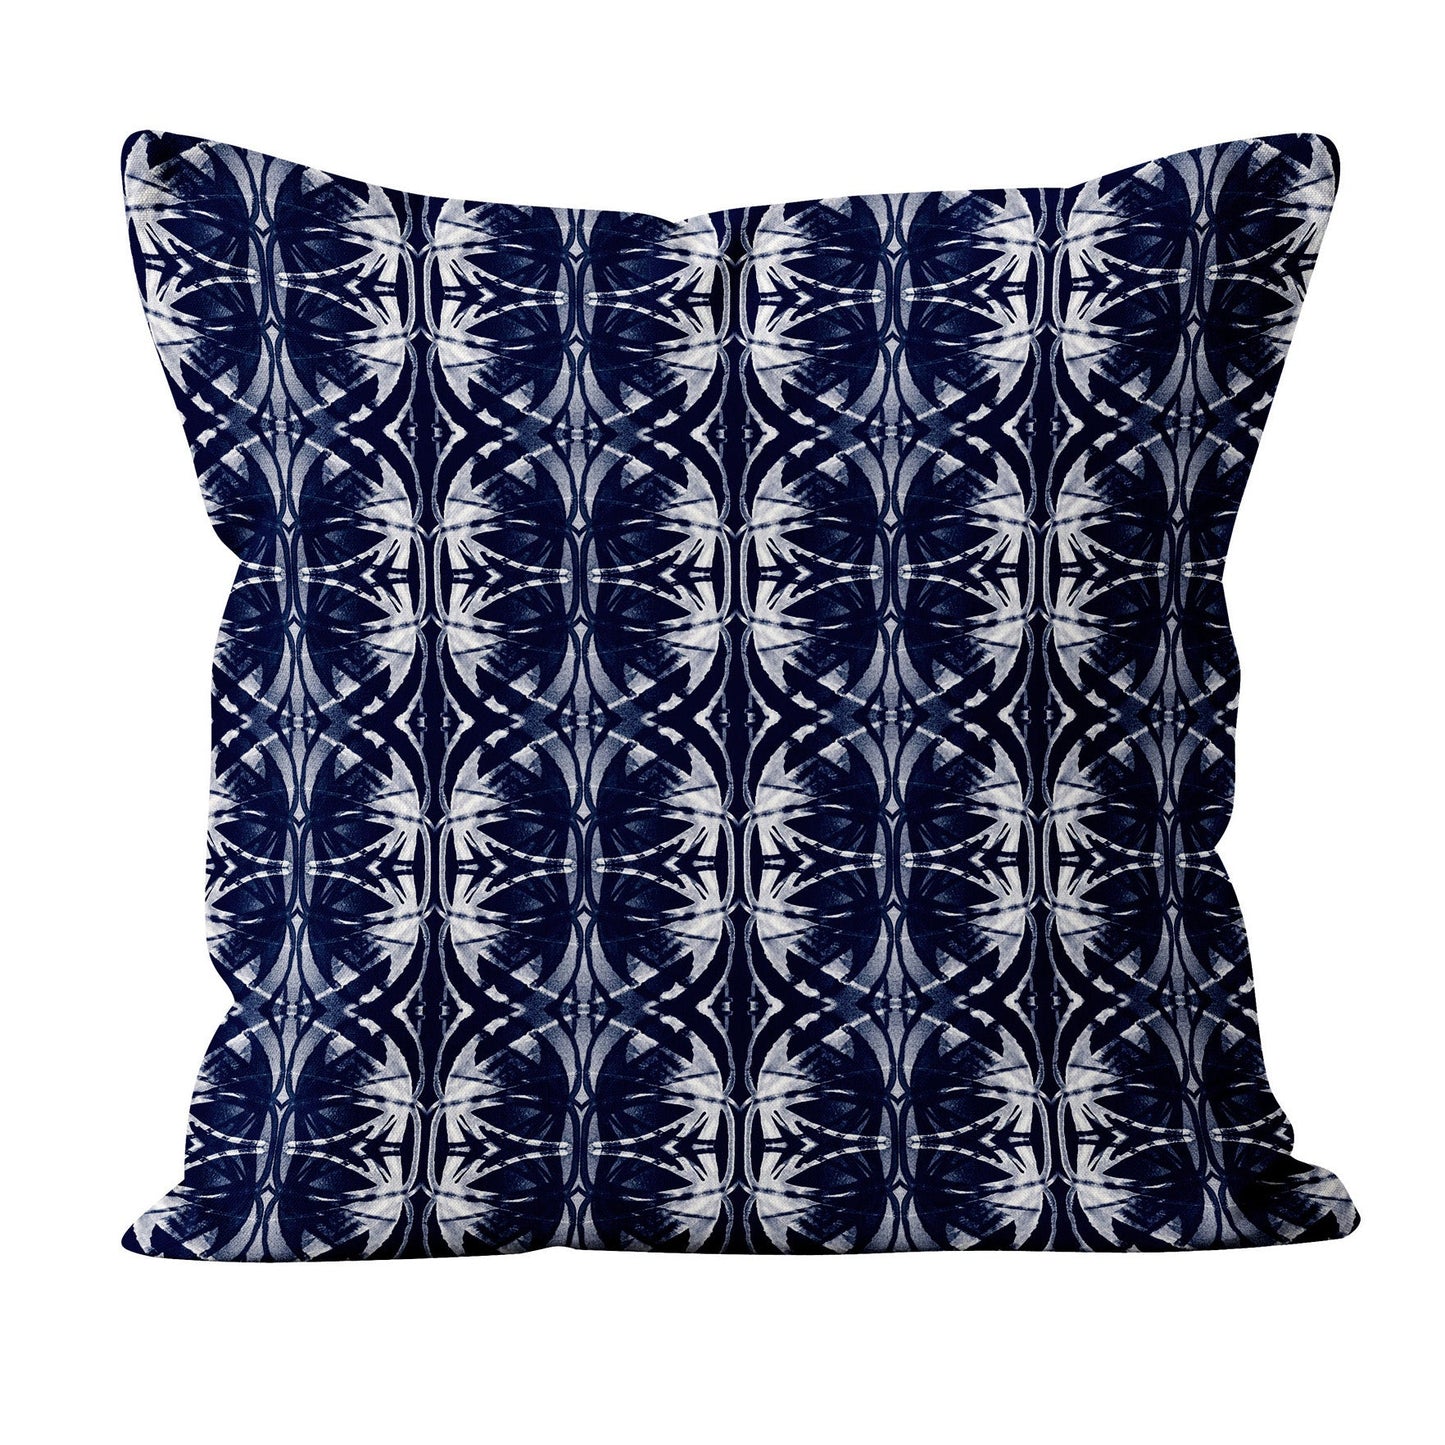 Throw pillow featuring abstract pattern in dark blue and white